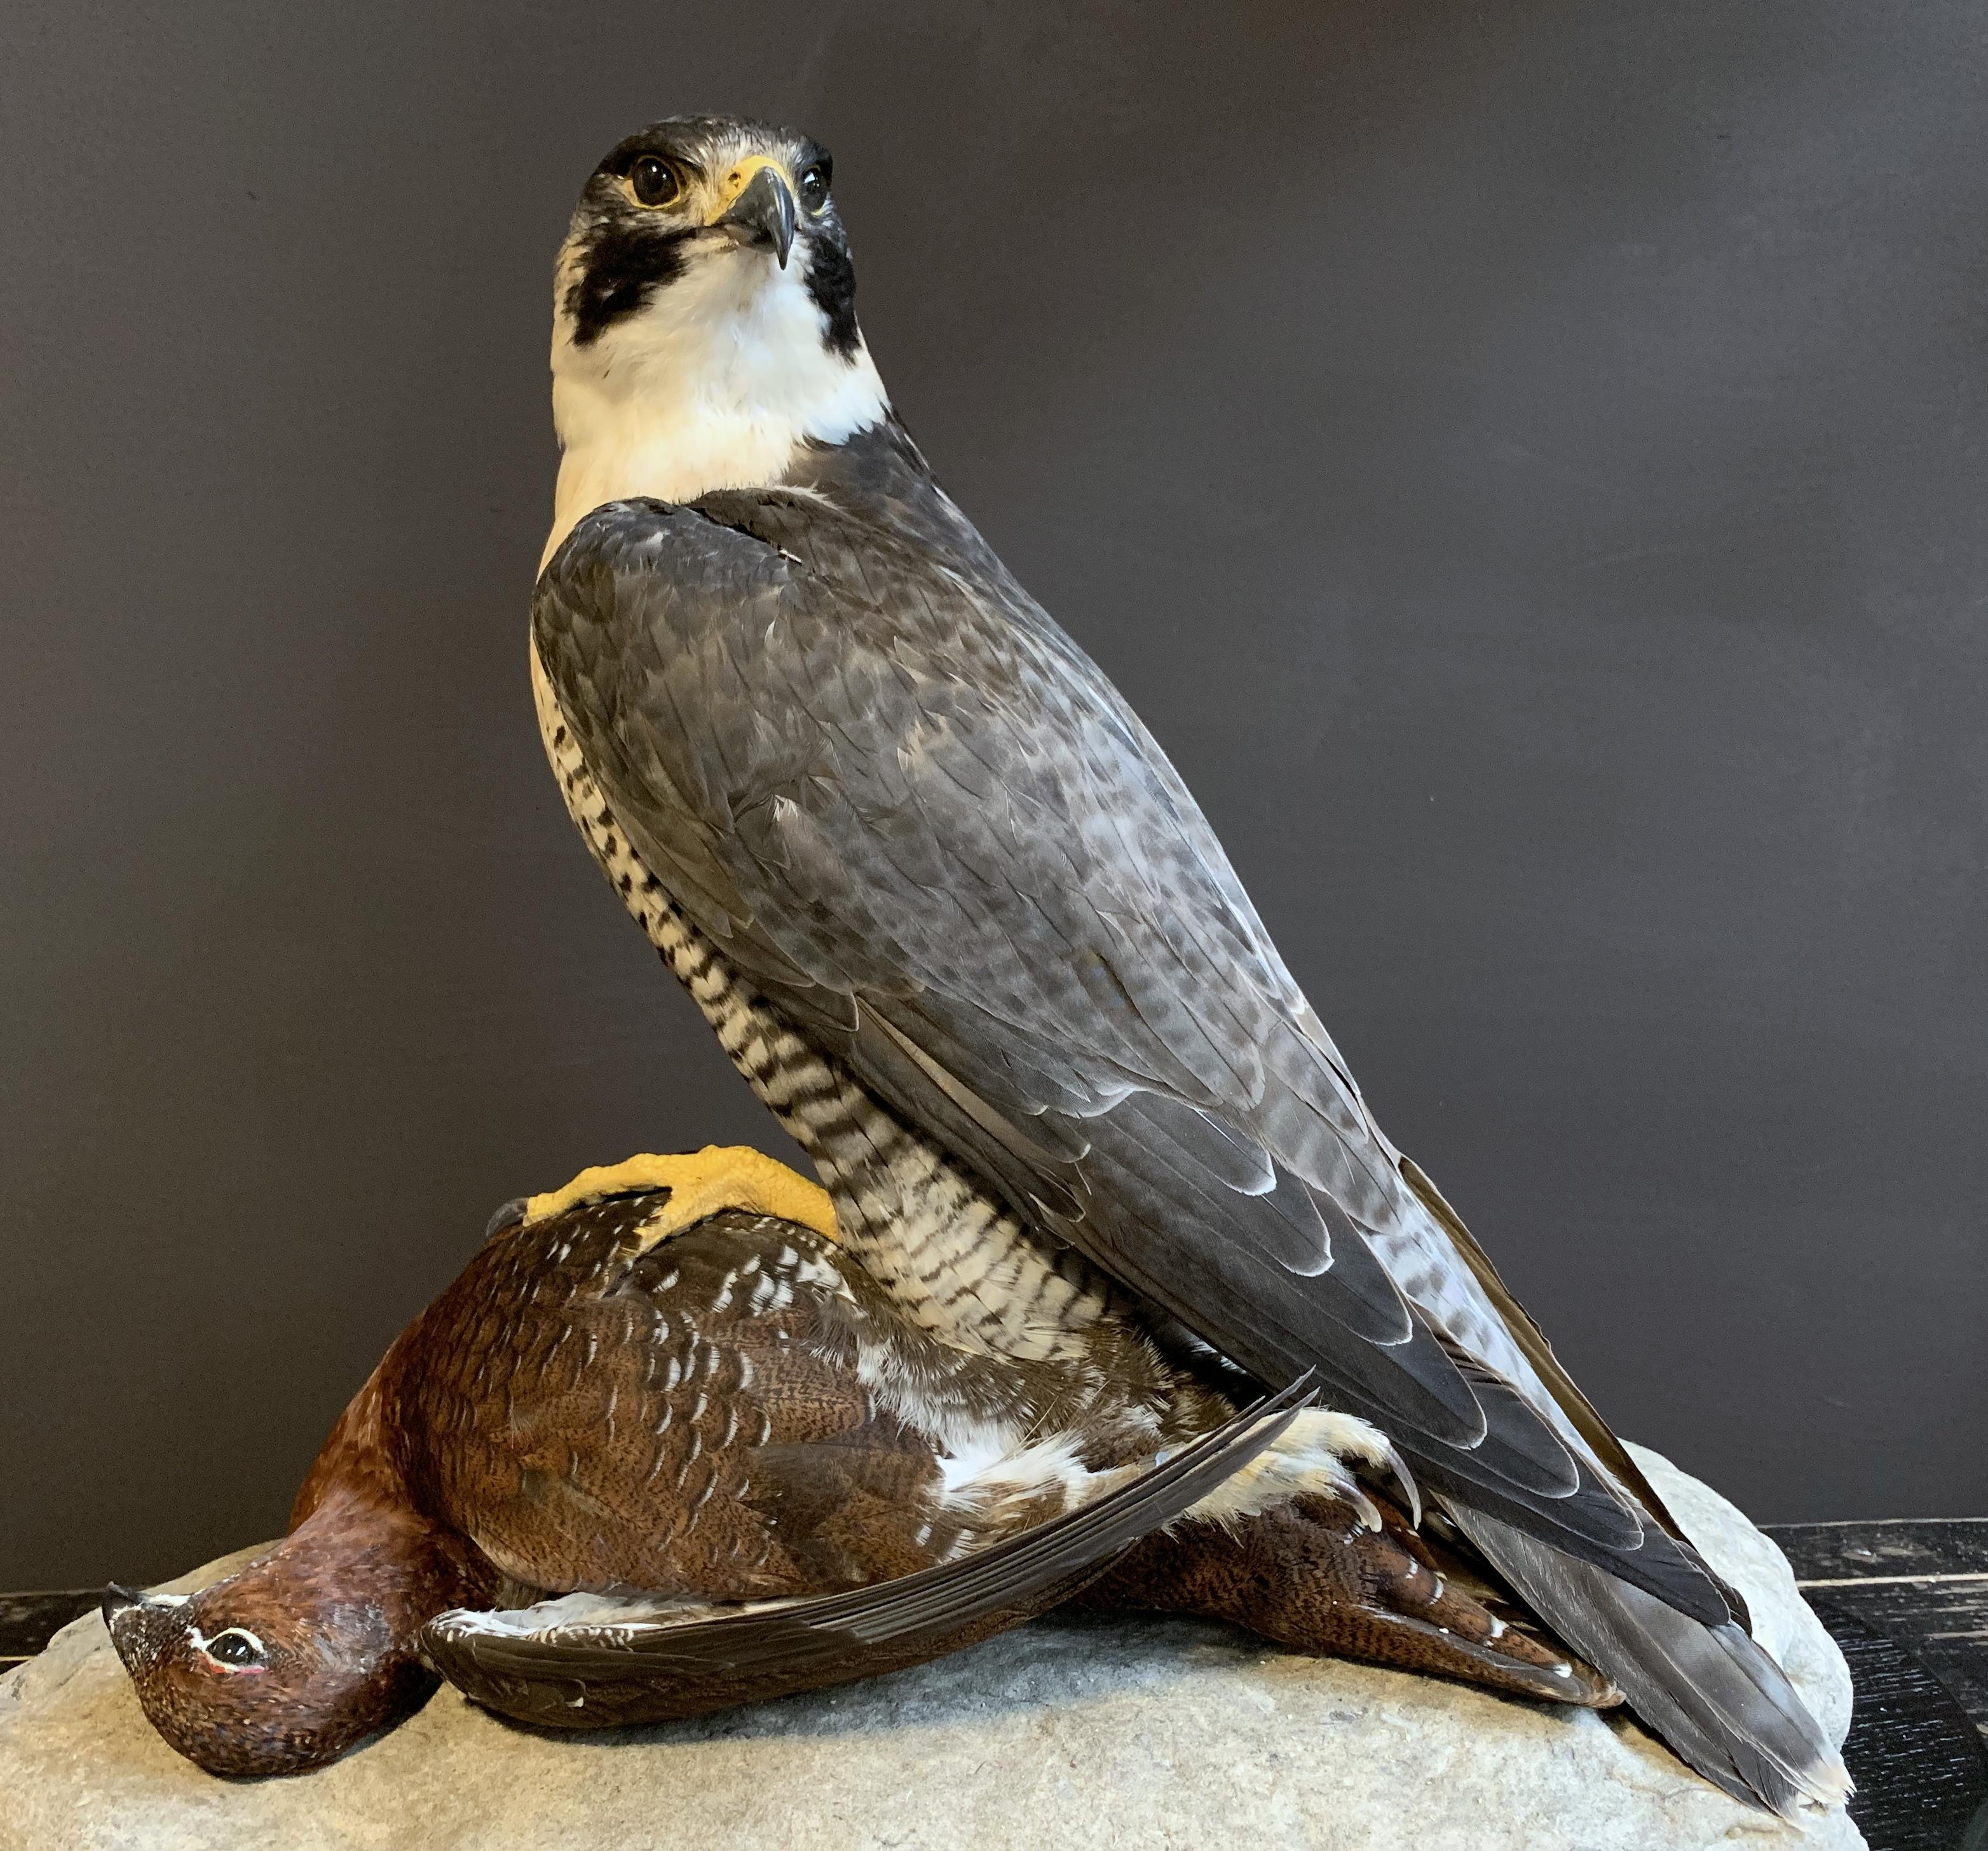 Feathers Recently Made Taxidermy Peregrine Falcon with Grouse as Prey